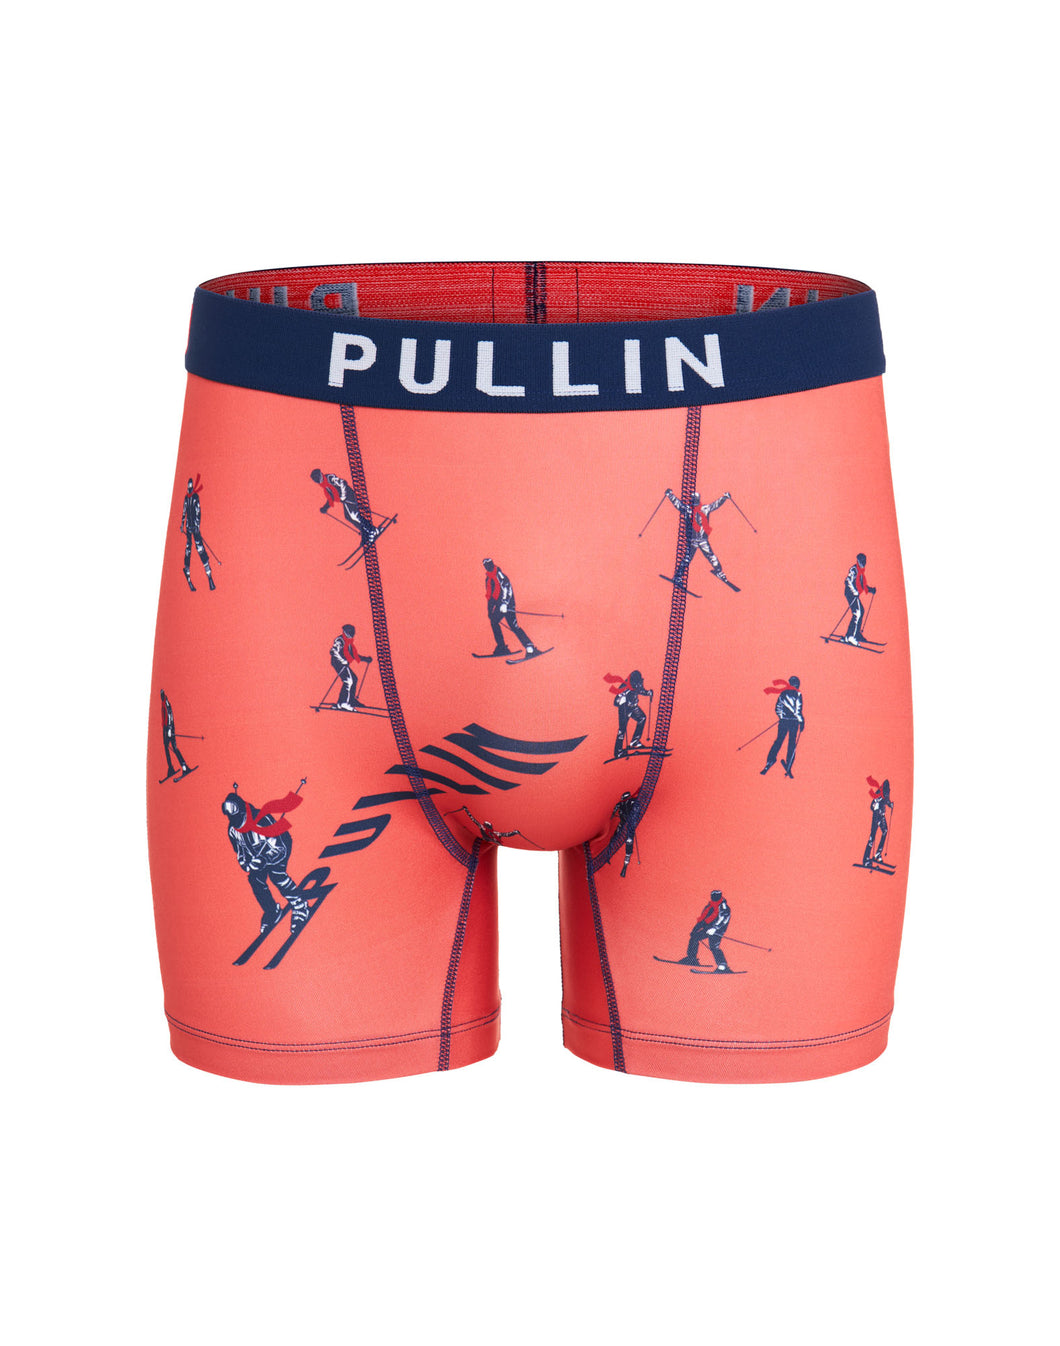 Boxer Pull In Fashion 2 Fonceur